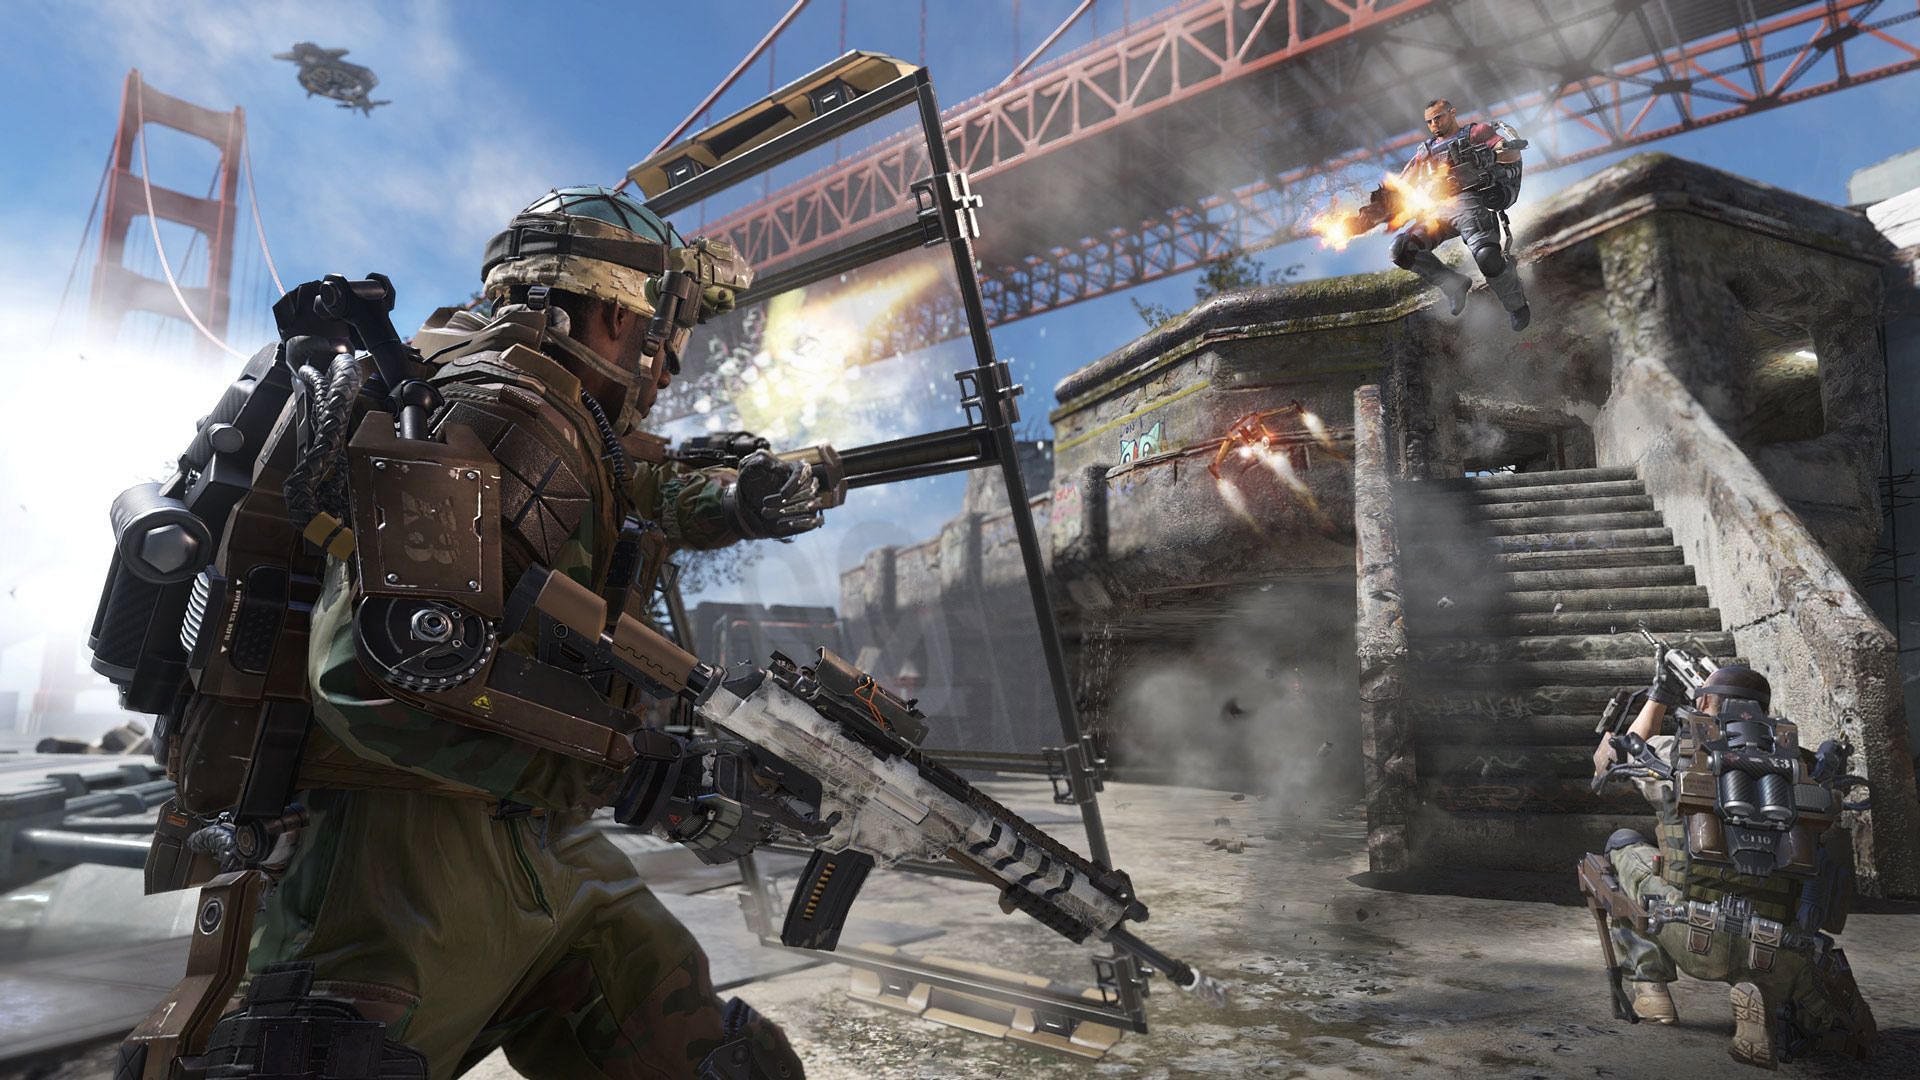 Call of Duty Advanced Warfare sequel is the rumored title for 2025 (Image via Activision)